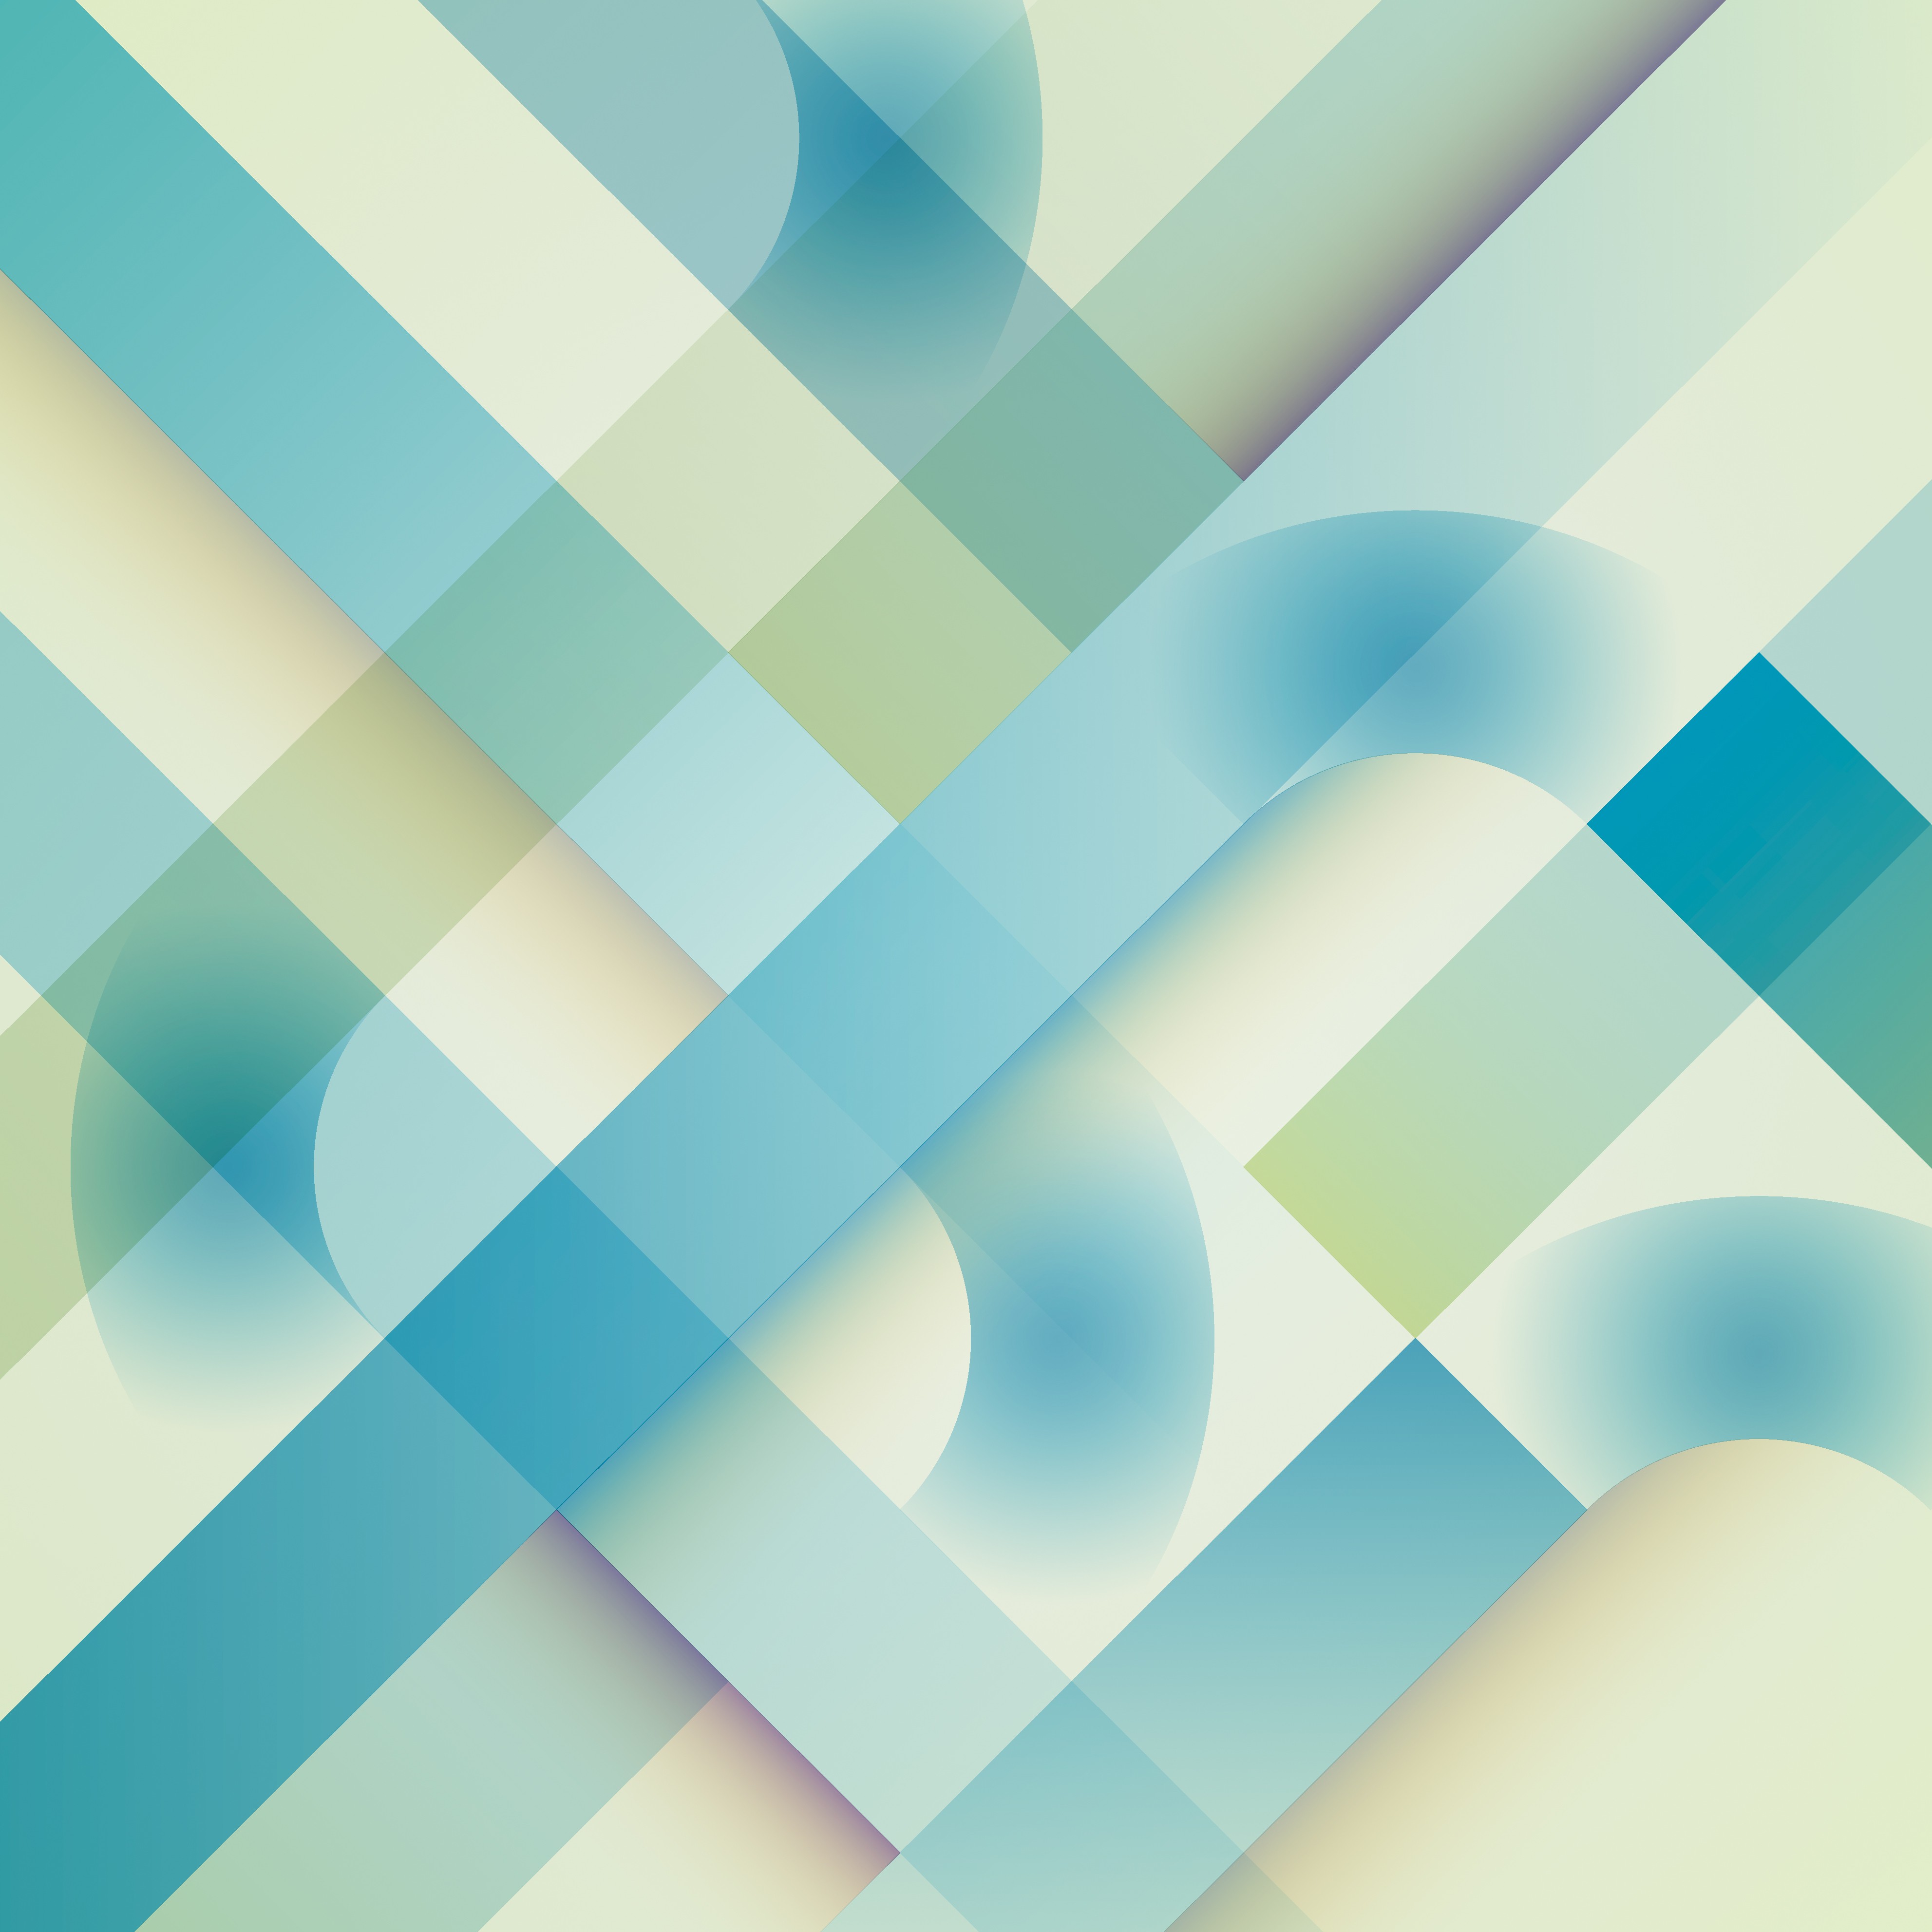 Download the Android L Developer Preview Wallpapers Here